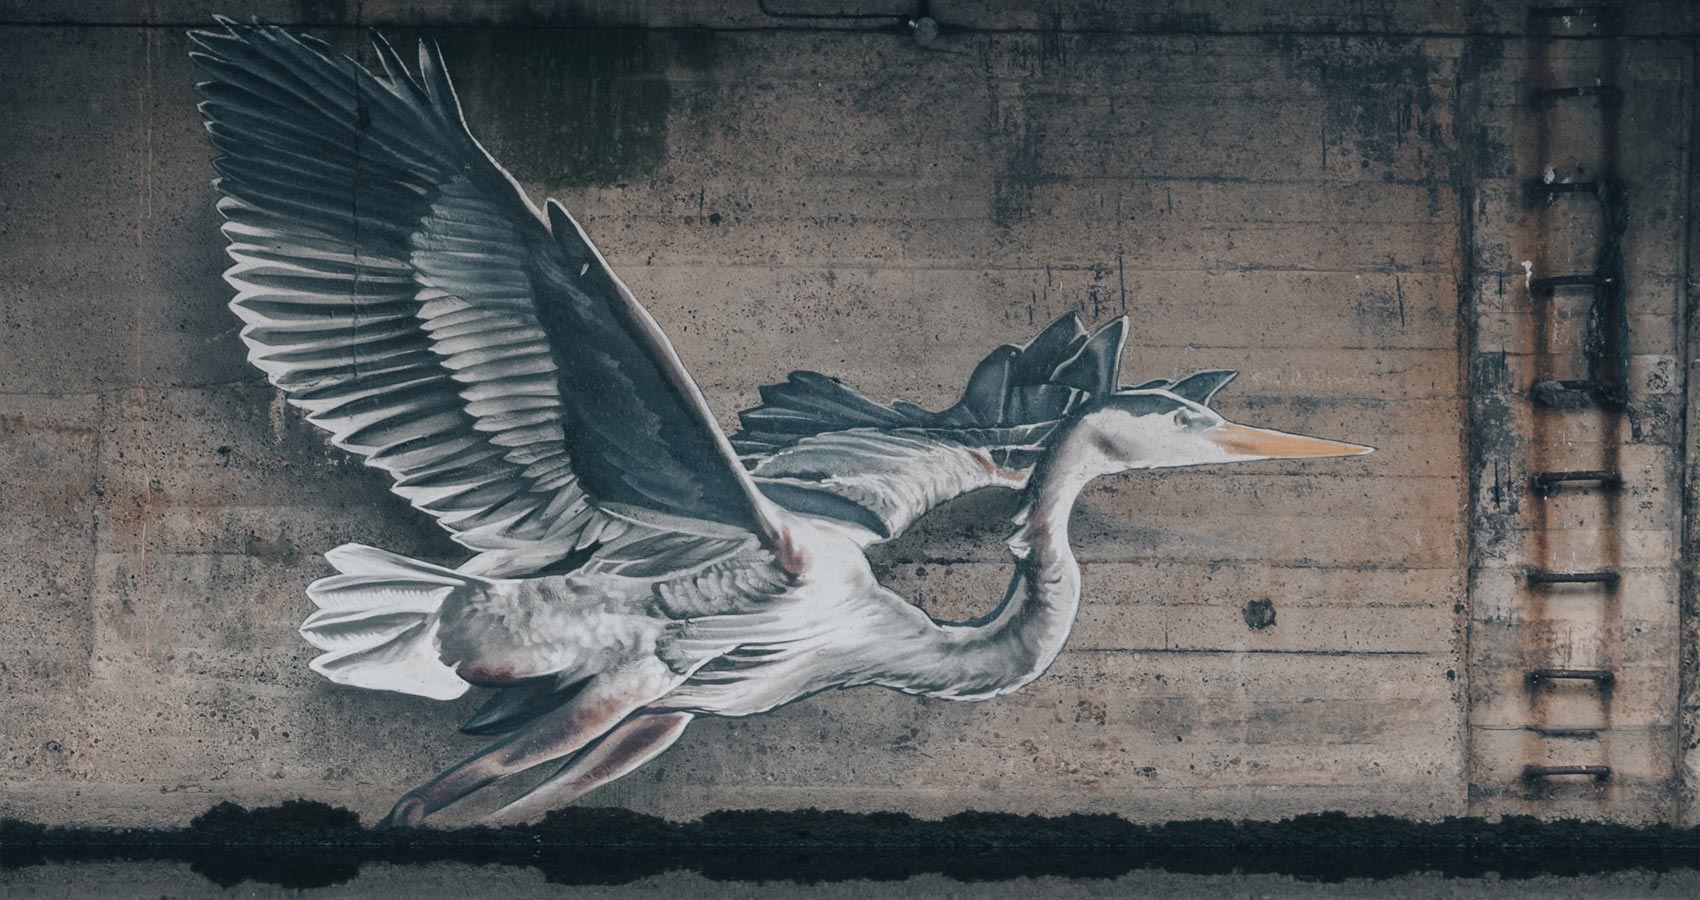 The Heron On The Weir, a poem by Alyson Faye at Spillwords.com